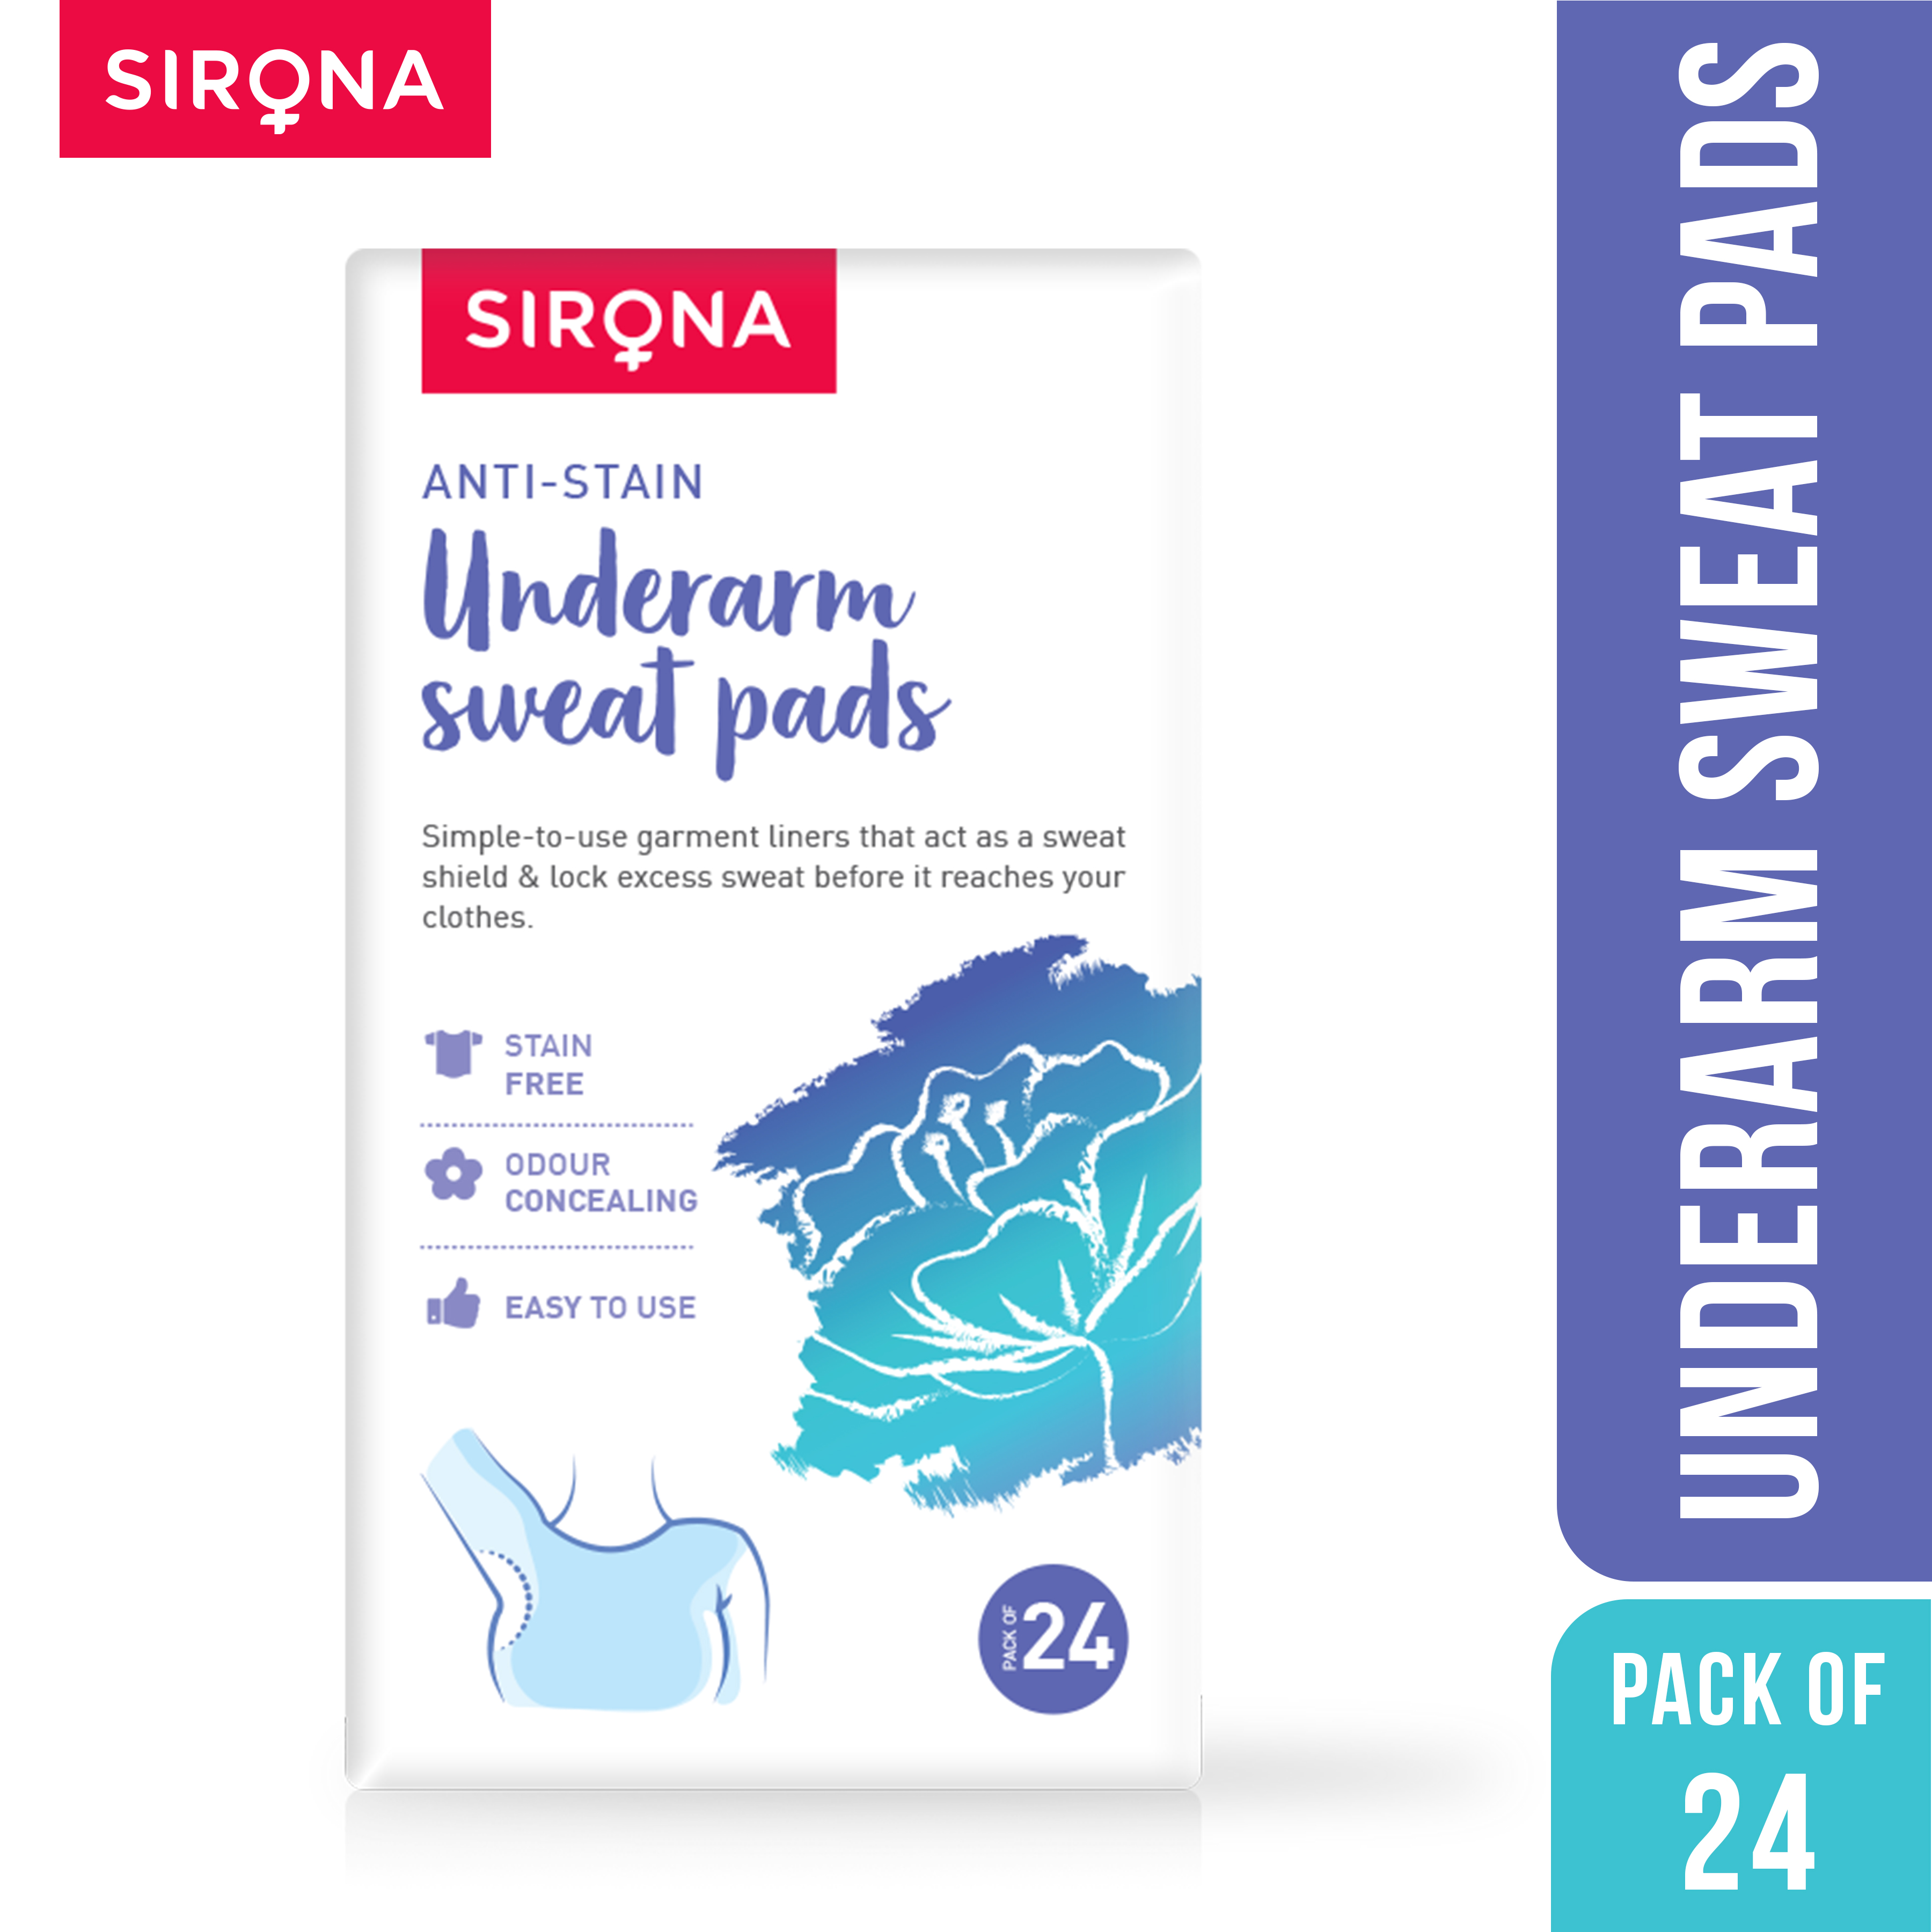 Sirona Disposable Maternity Breast Pads for Women - 36 Pads